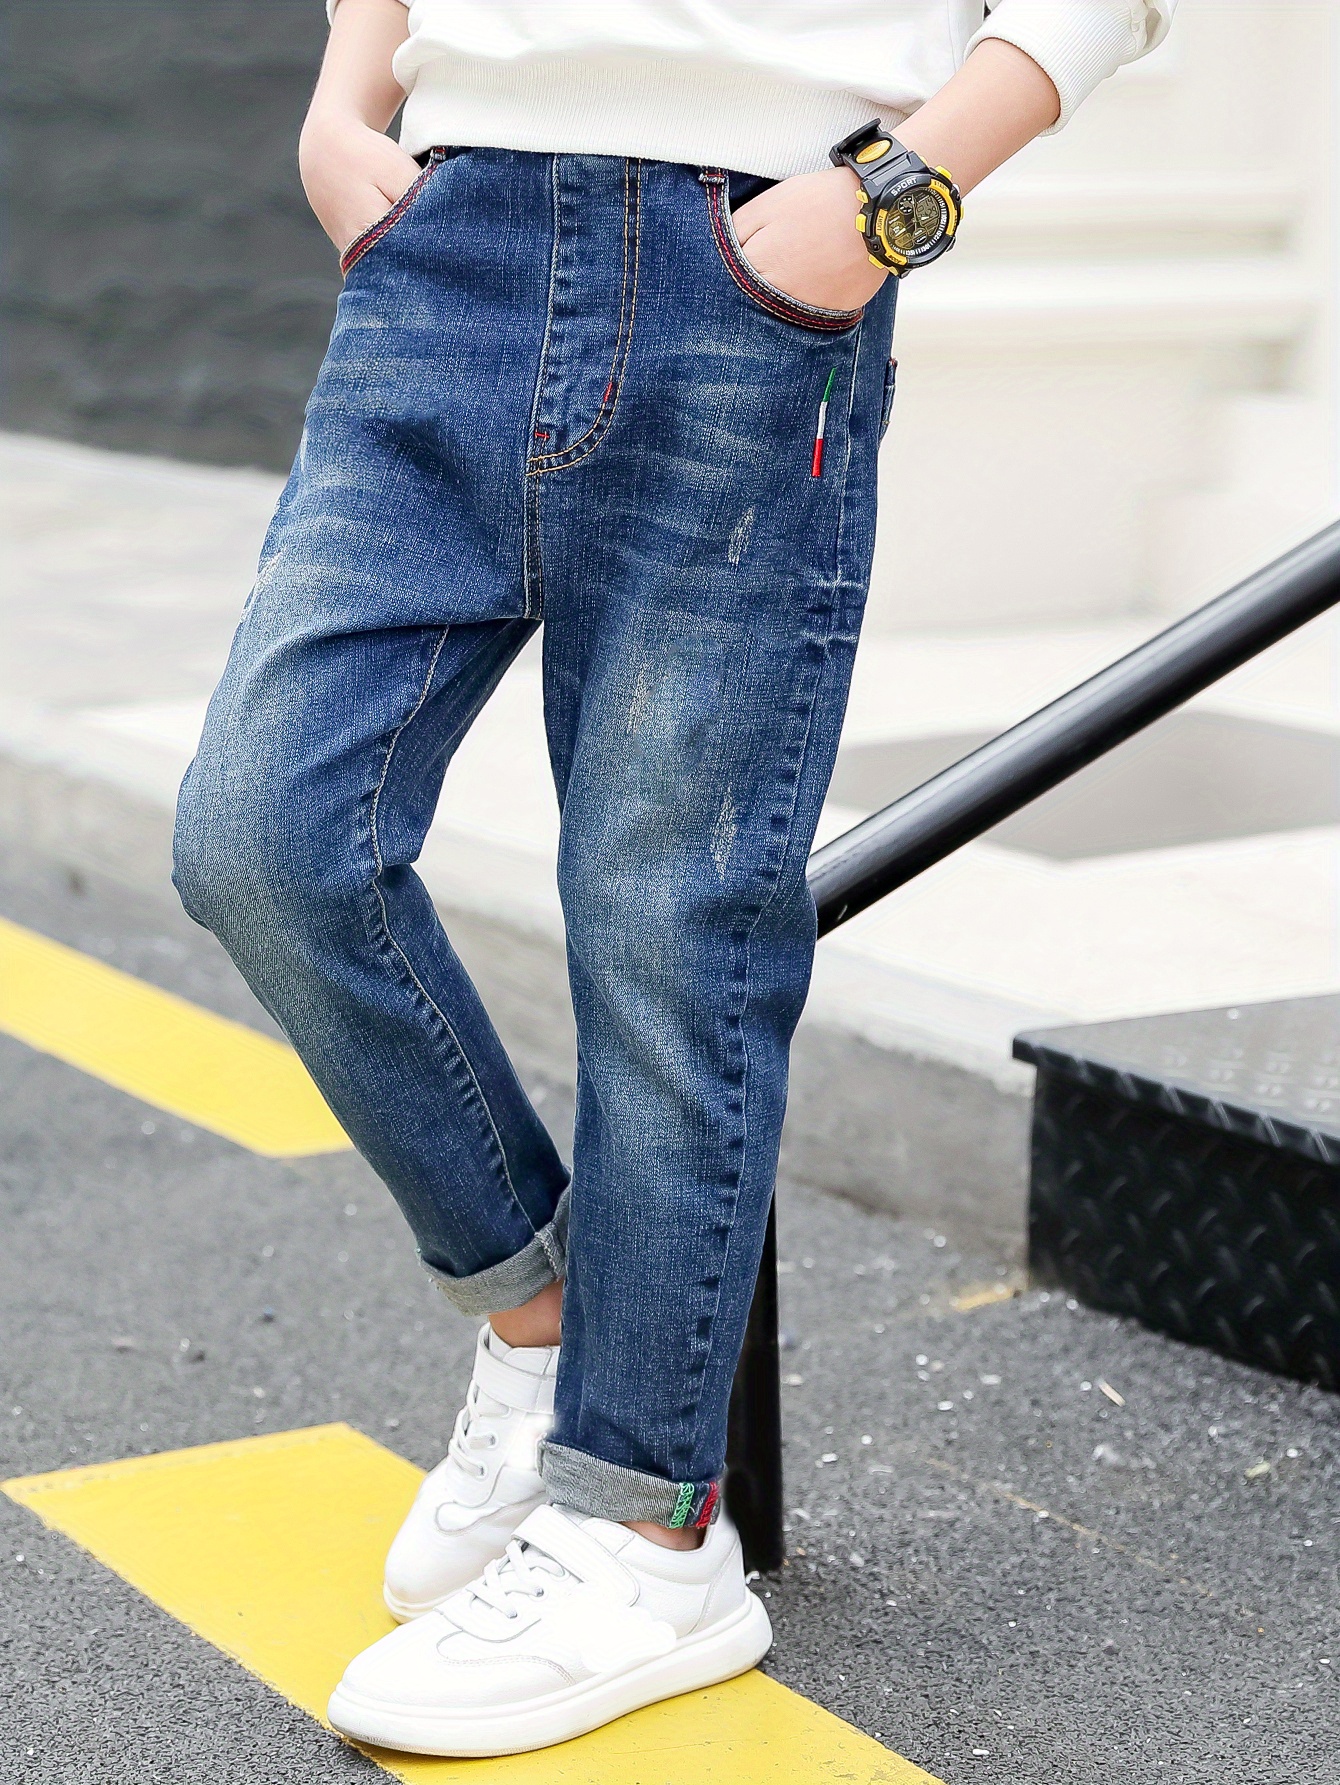 QXXKJDS Spring Autumn Casual Jeans Thin Denim Ankle Length Pants